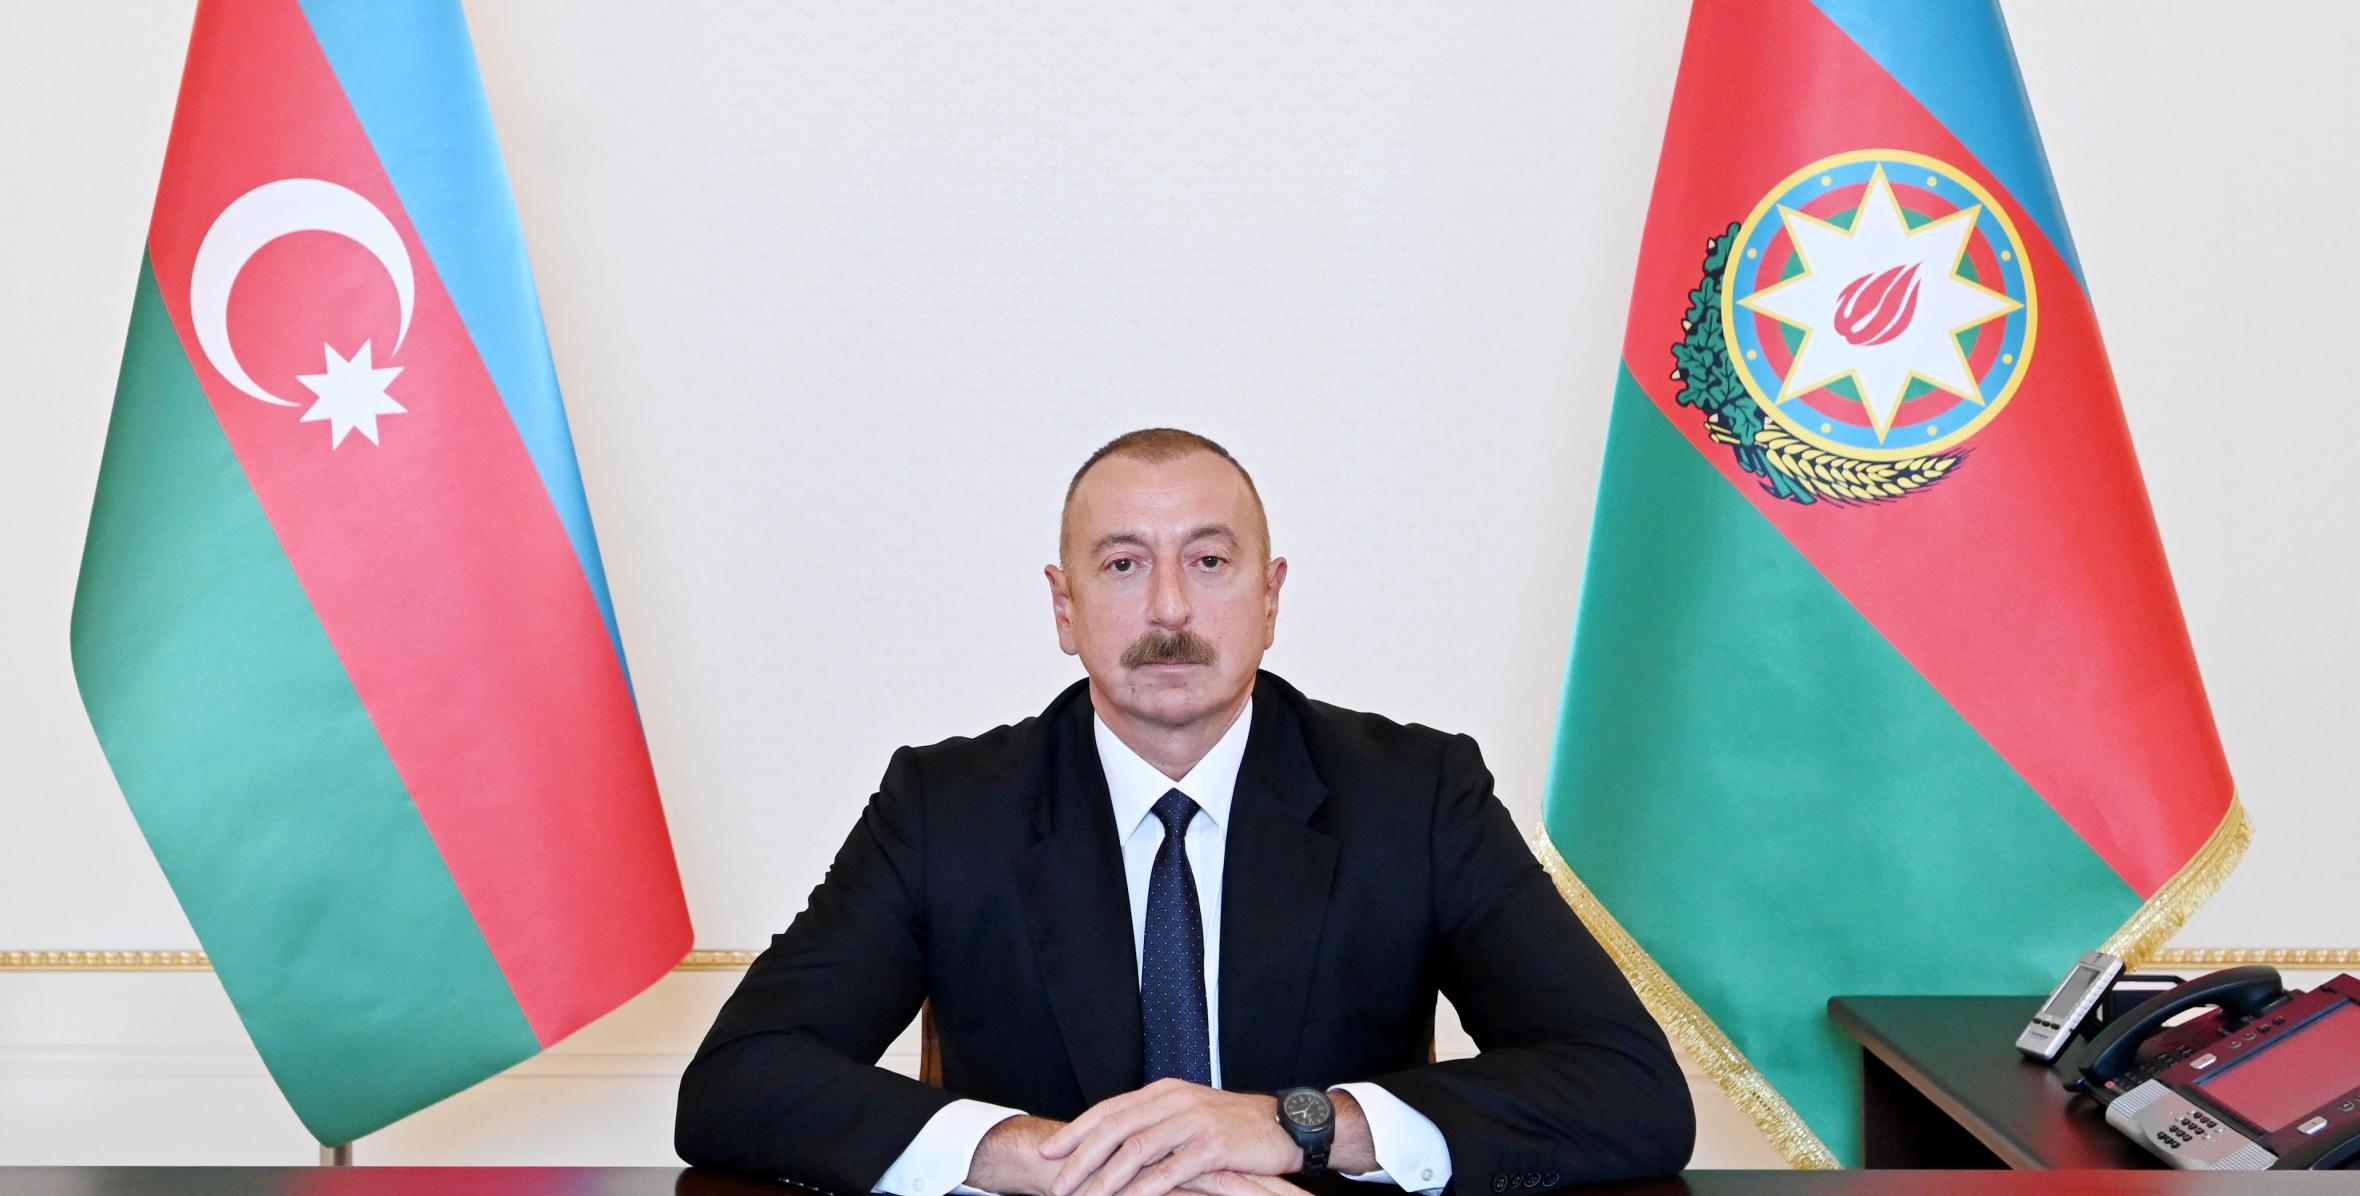 President of Azerbaijan: We understand that U.S. could make contribution to process of preparing peace agreement